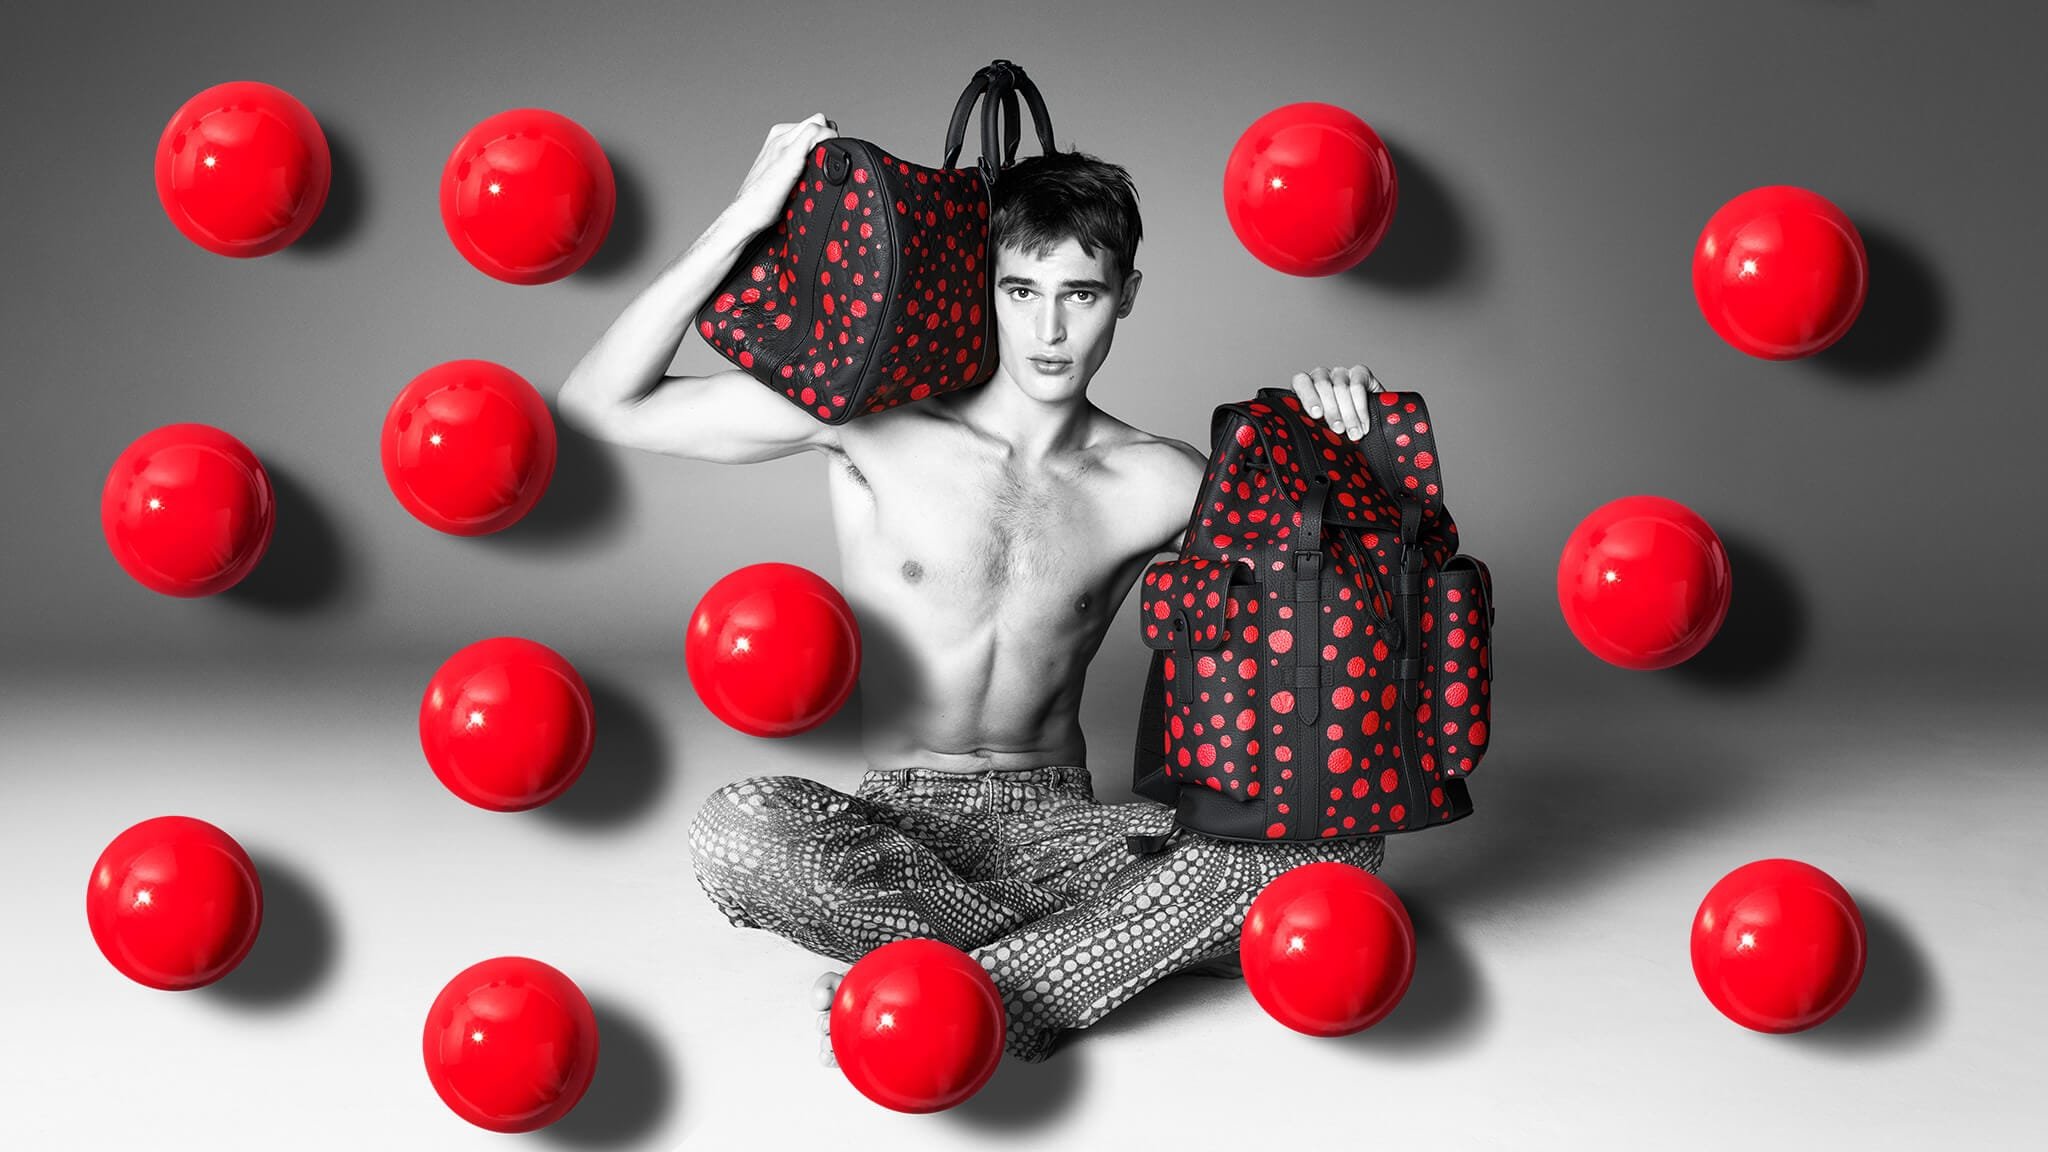 Creating Infinity: The Worlds of Louis Vuitton and Yayoi Kusama – Harbour  City